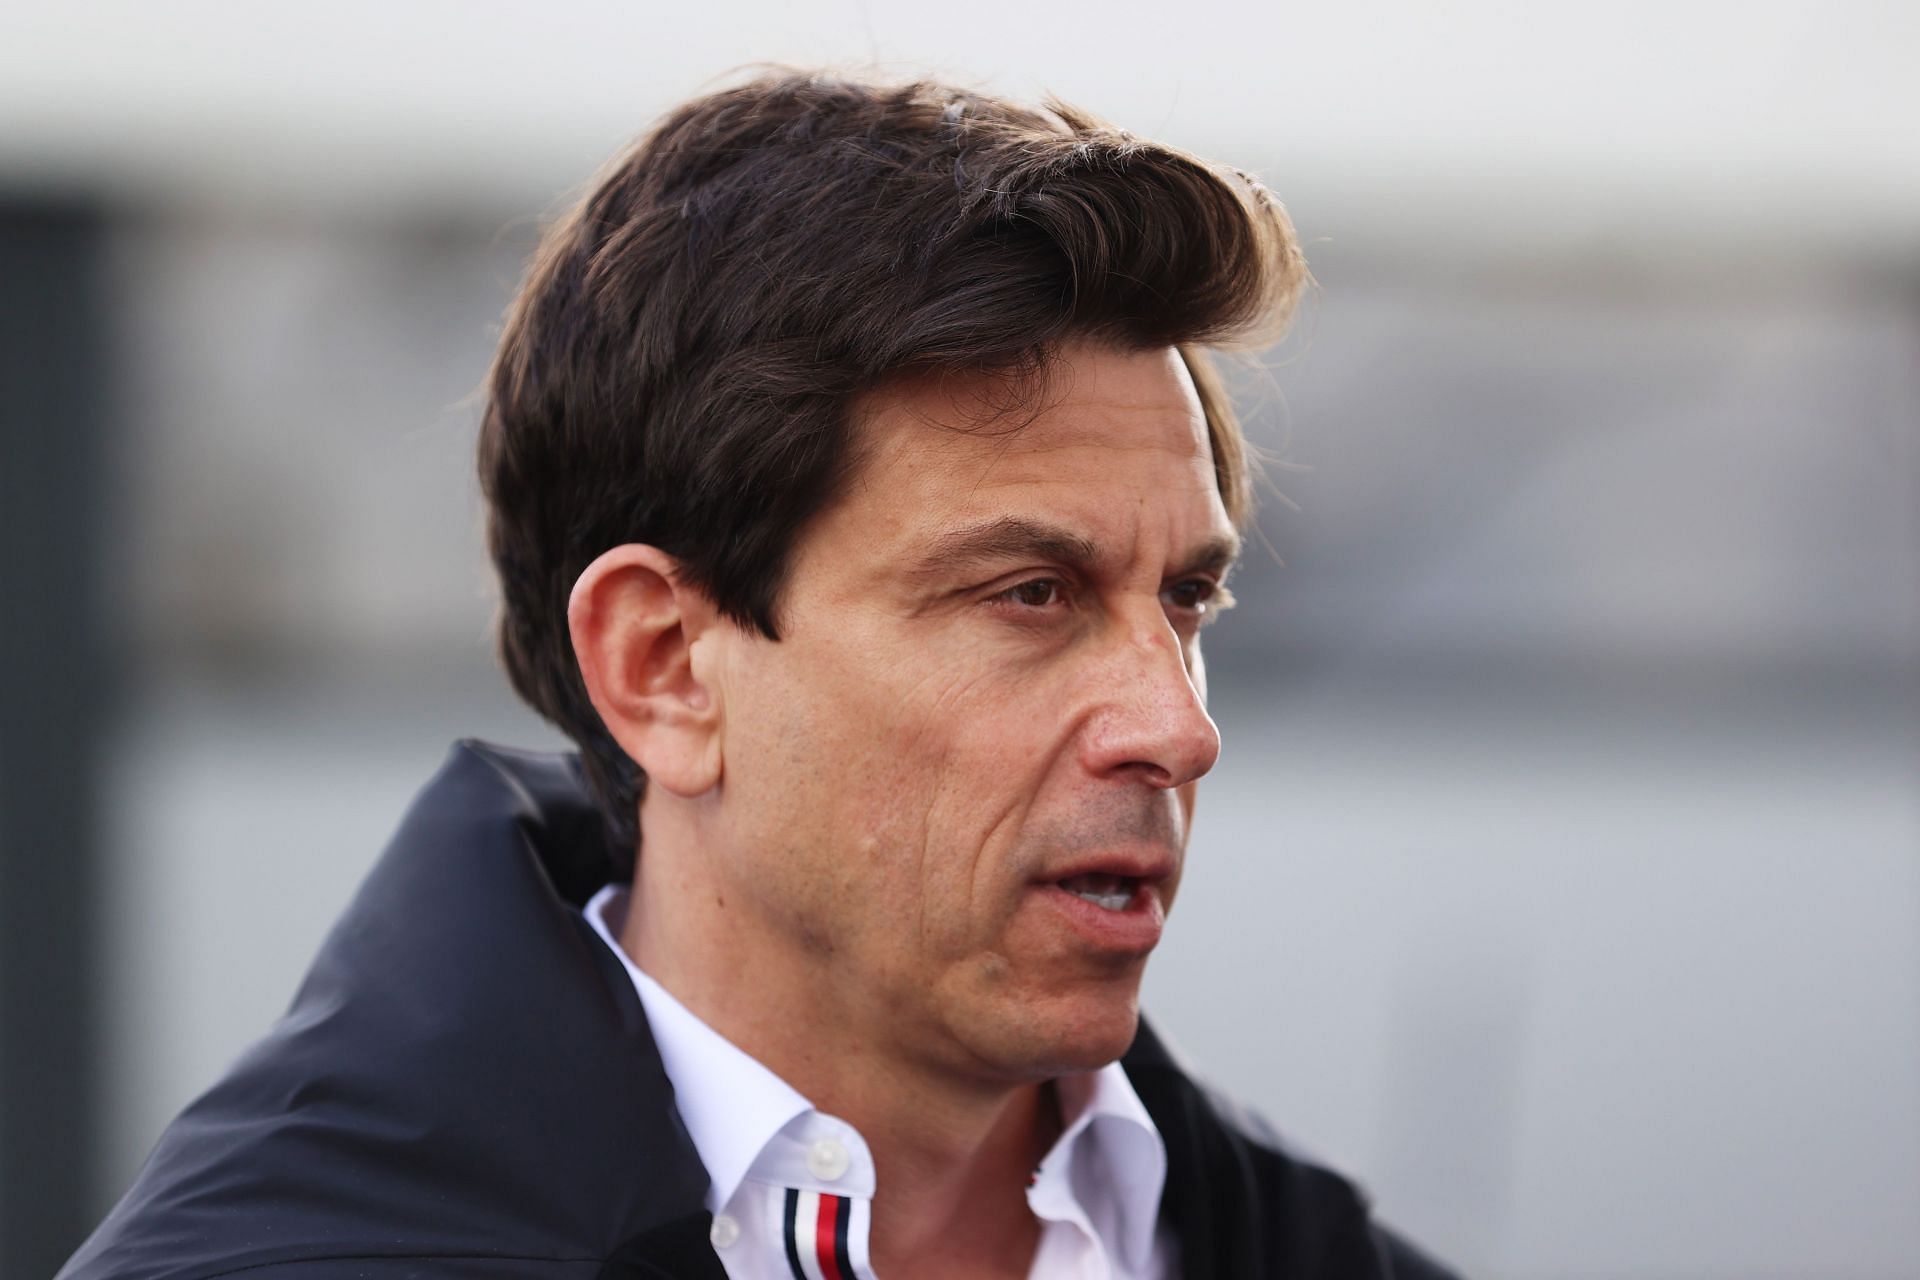 Mercedes team principal Toto Wolff during the 2022 F1 Imola GP weekend (Photo by Robert Cianflone/Getty Images)